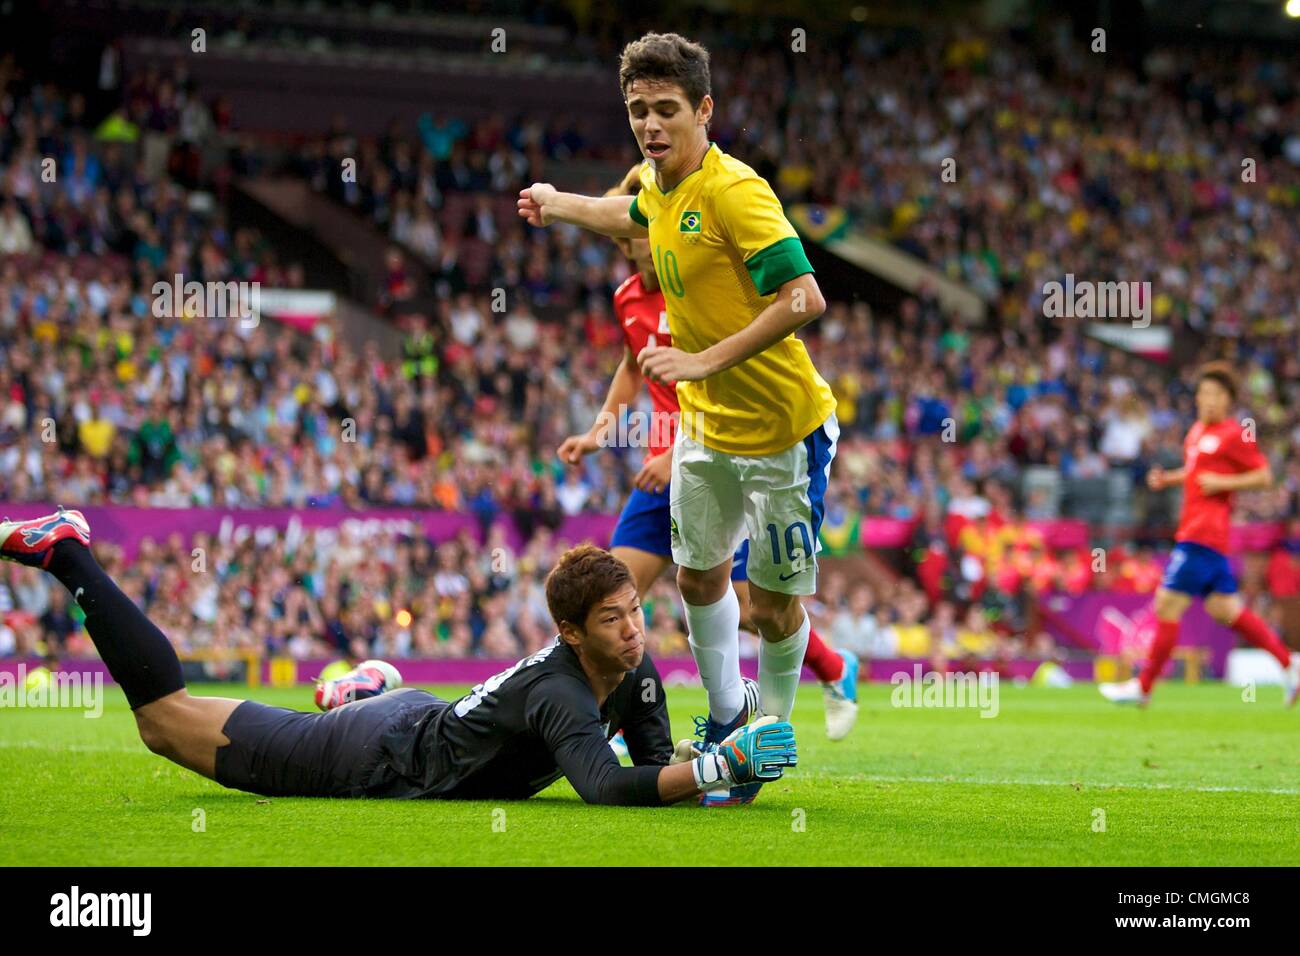 07.08.2012 Manchester, England. 2012 Olympic Games mens football tournament. Brazil midfielder Oscar and Korea goalkeeper Bumyoung Lee in action during the semi final match between Brazil and South Korea. Stock Photo